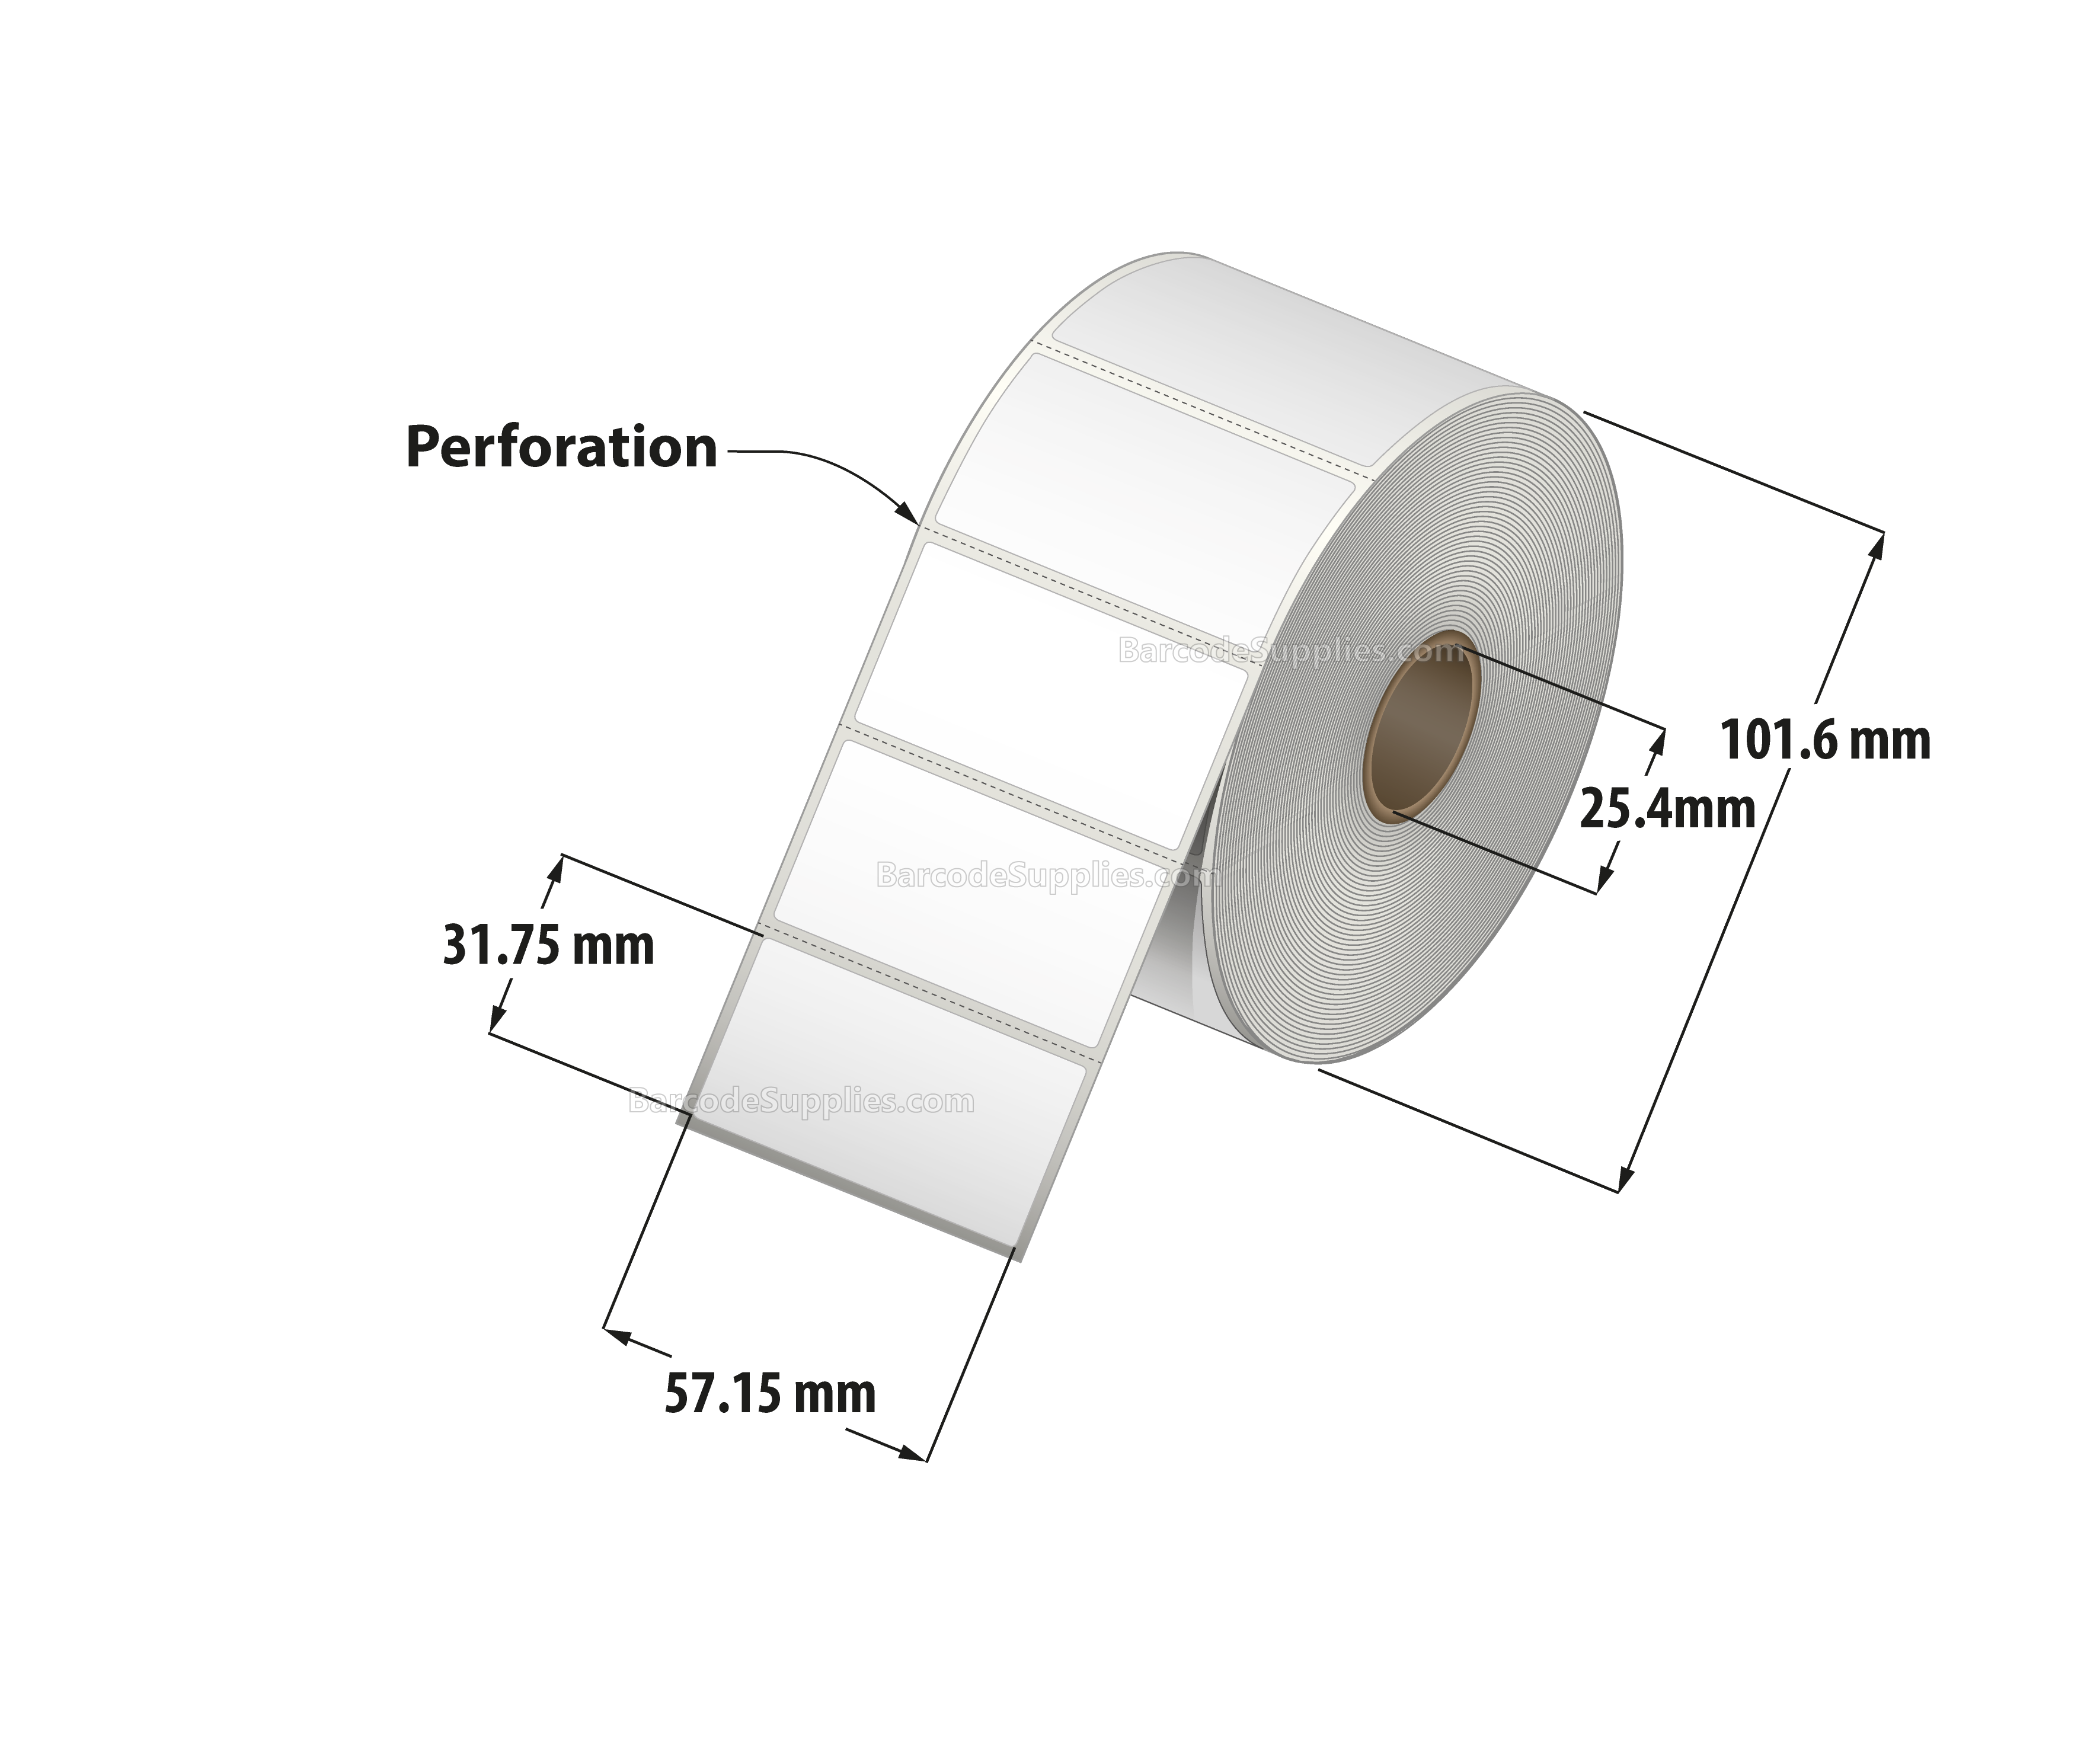 2.25 x 1.25 Direct Thermal White Labels With Acrylic Adhesive - Perforated - 1135 Labels Per Roll - Carton Of 12 Rolls - 13620 Labels Total - MPN: RDE-225-125-1135-1 - BarcodeSource, Inc.